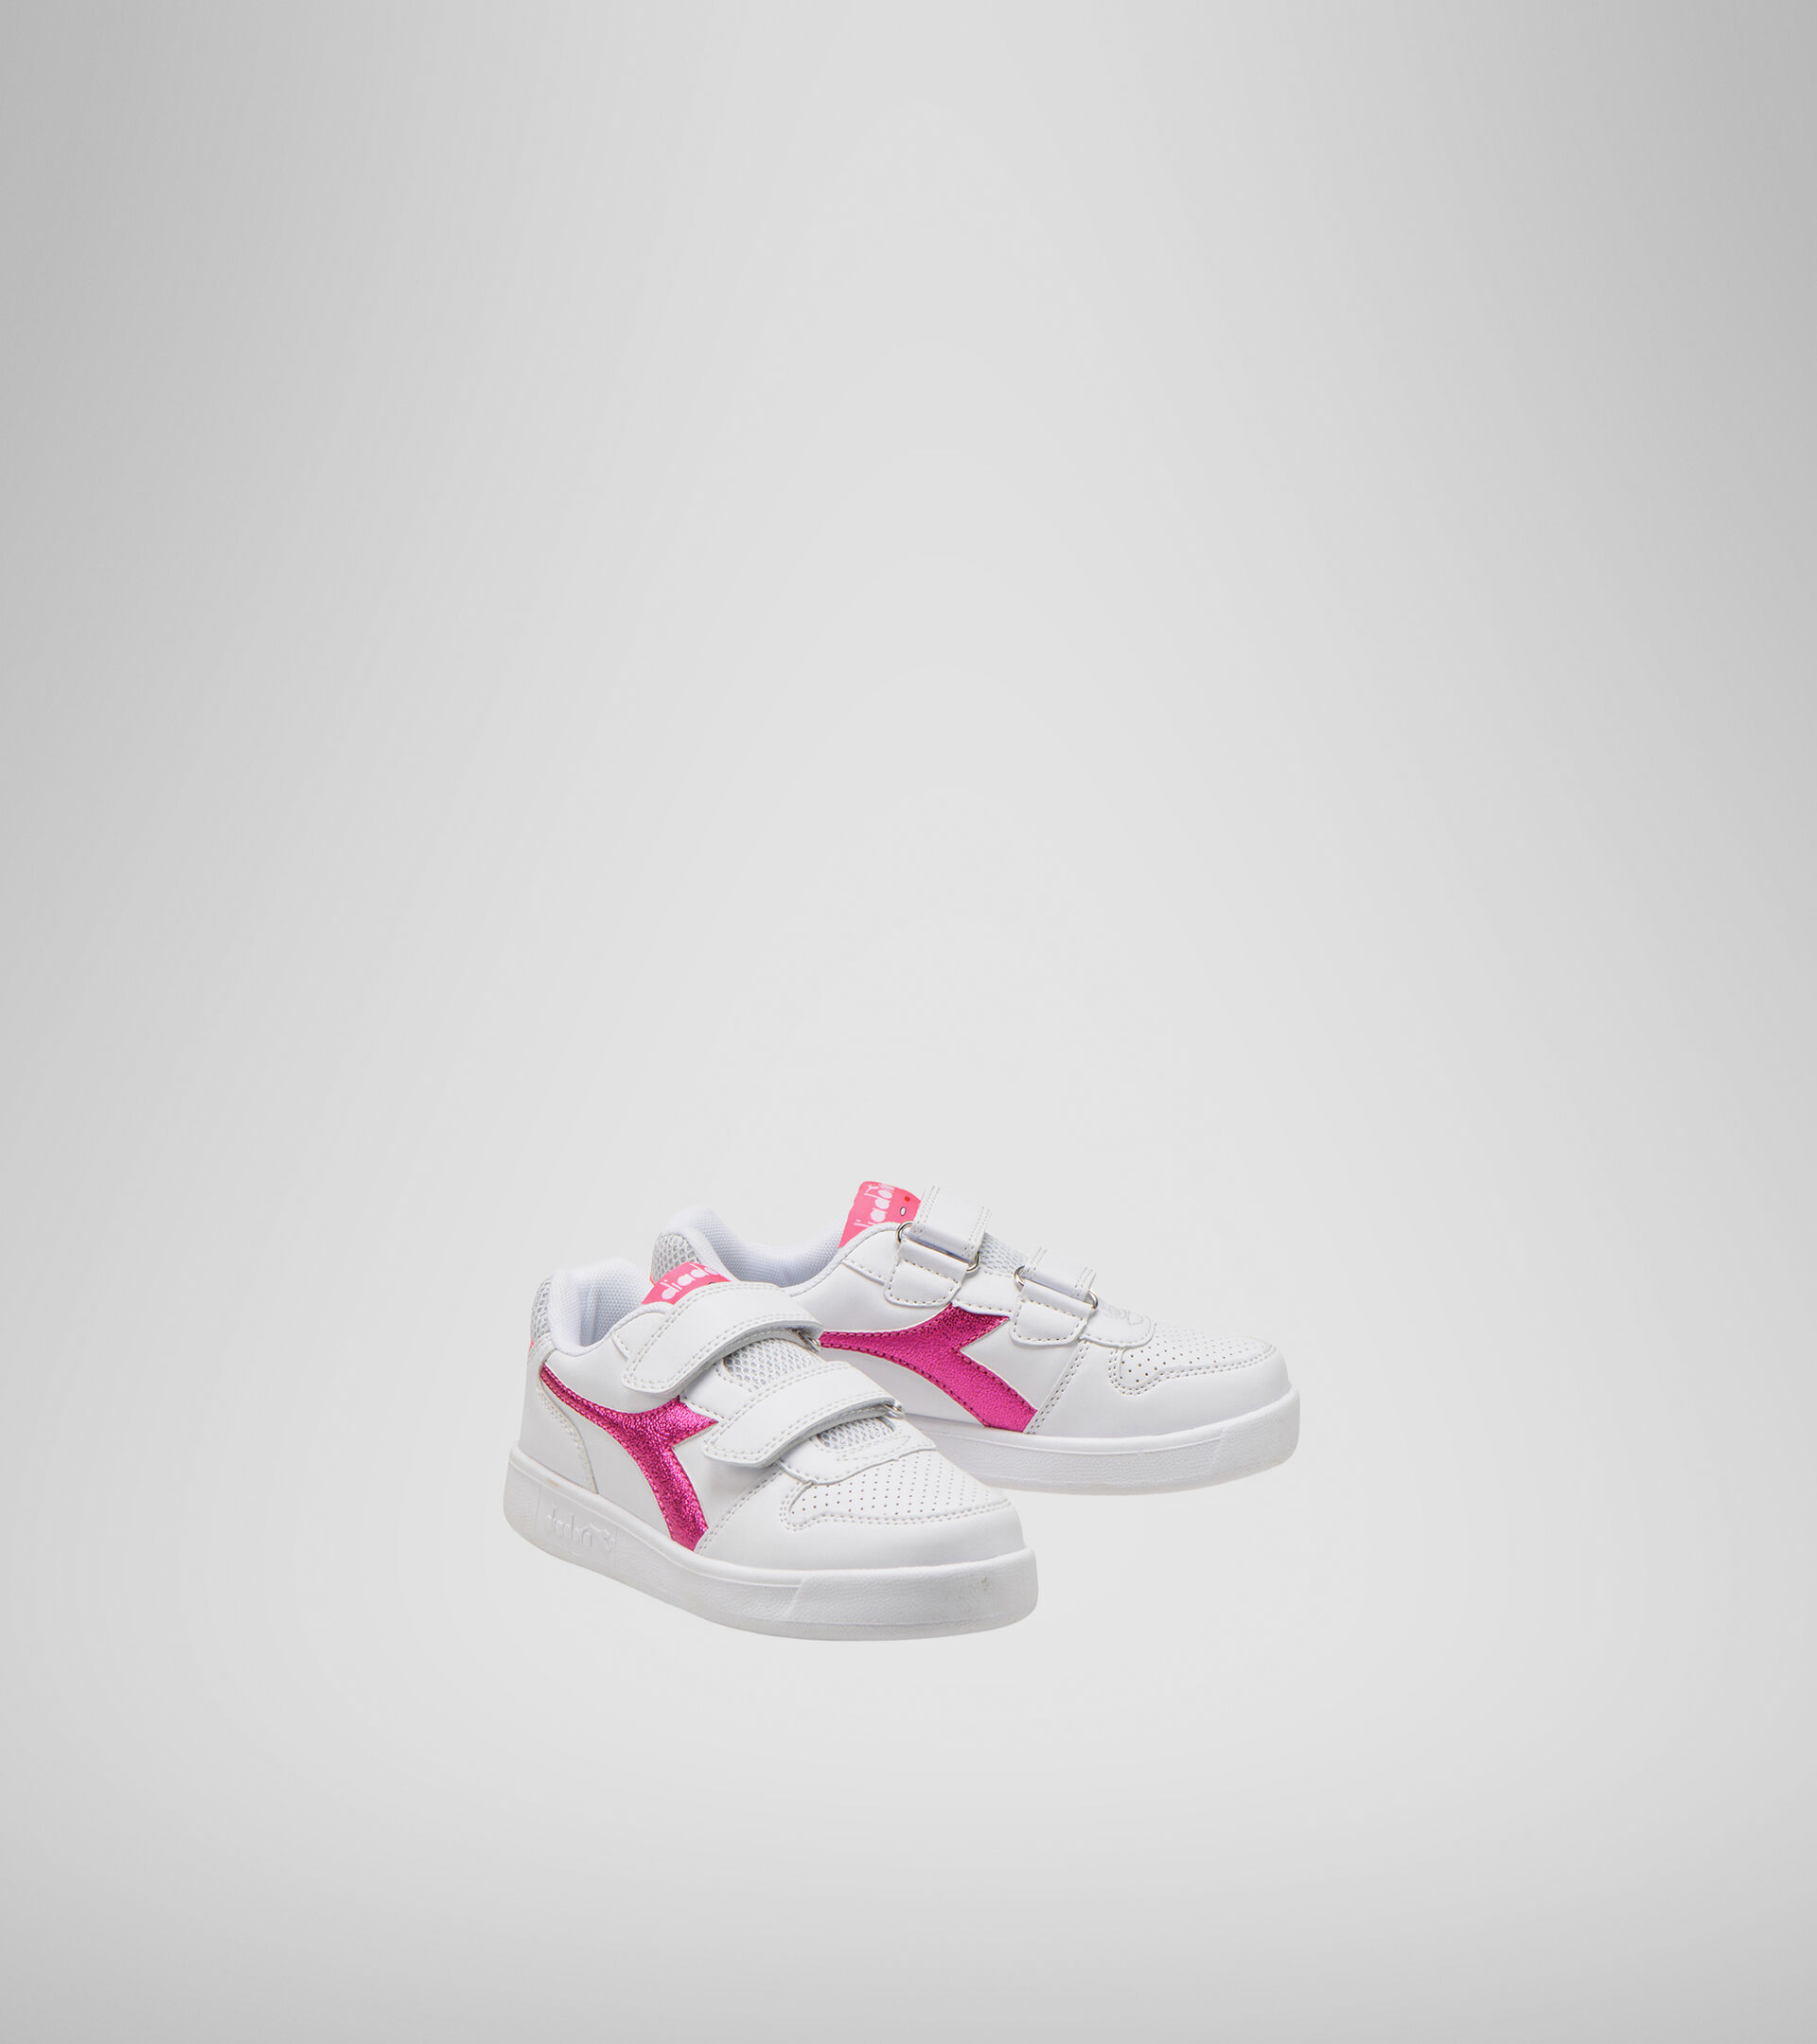 Sports shoes - Kids 4-8 years PLAYGROUND PS GIRL WHITE/PINK FLUO - Diadora